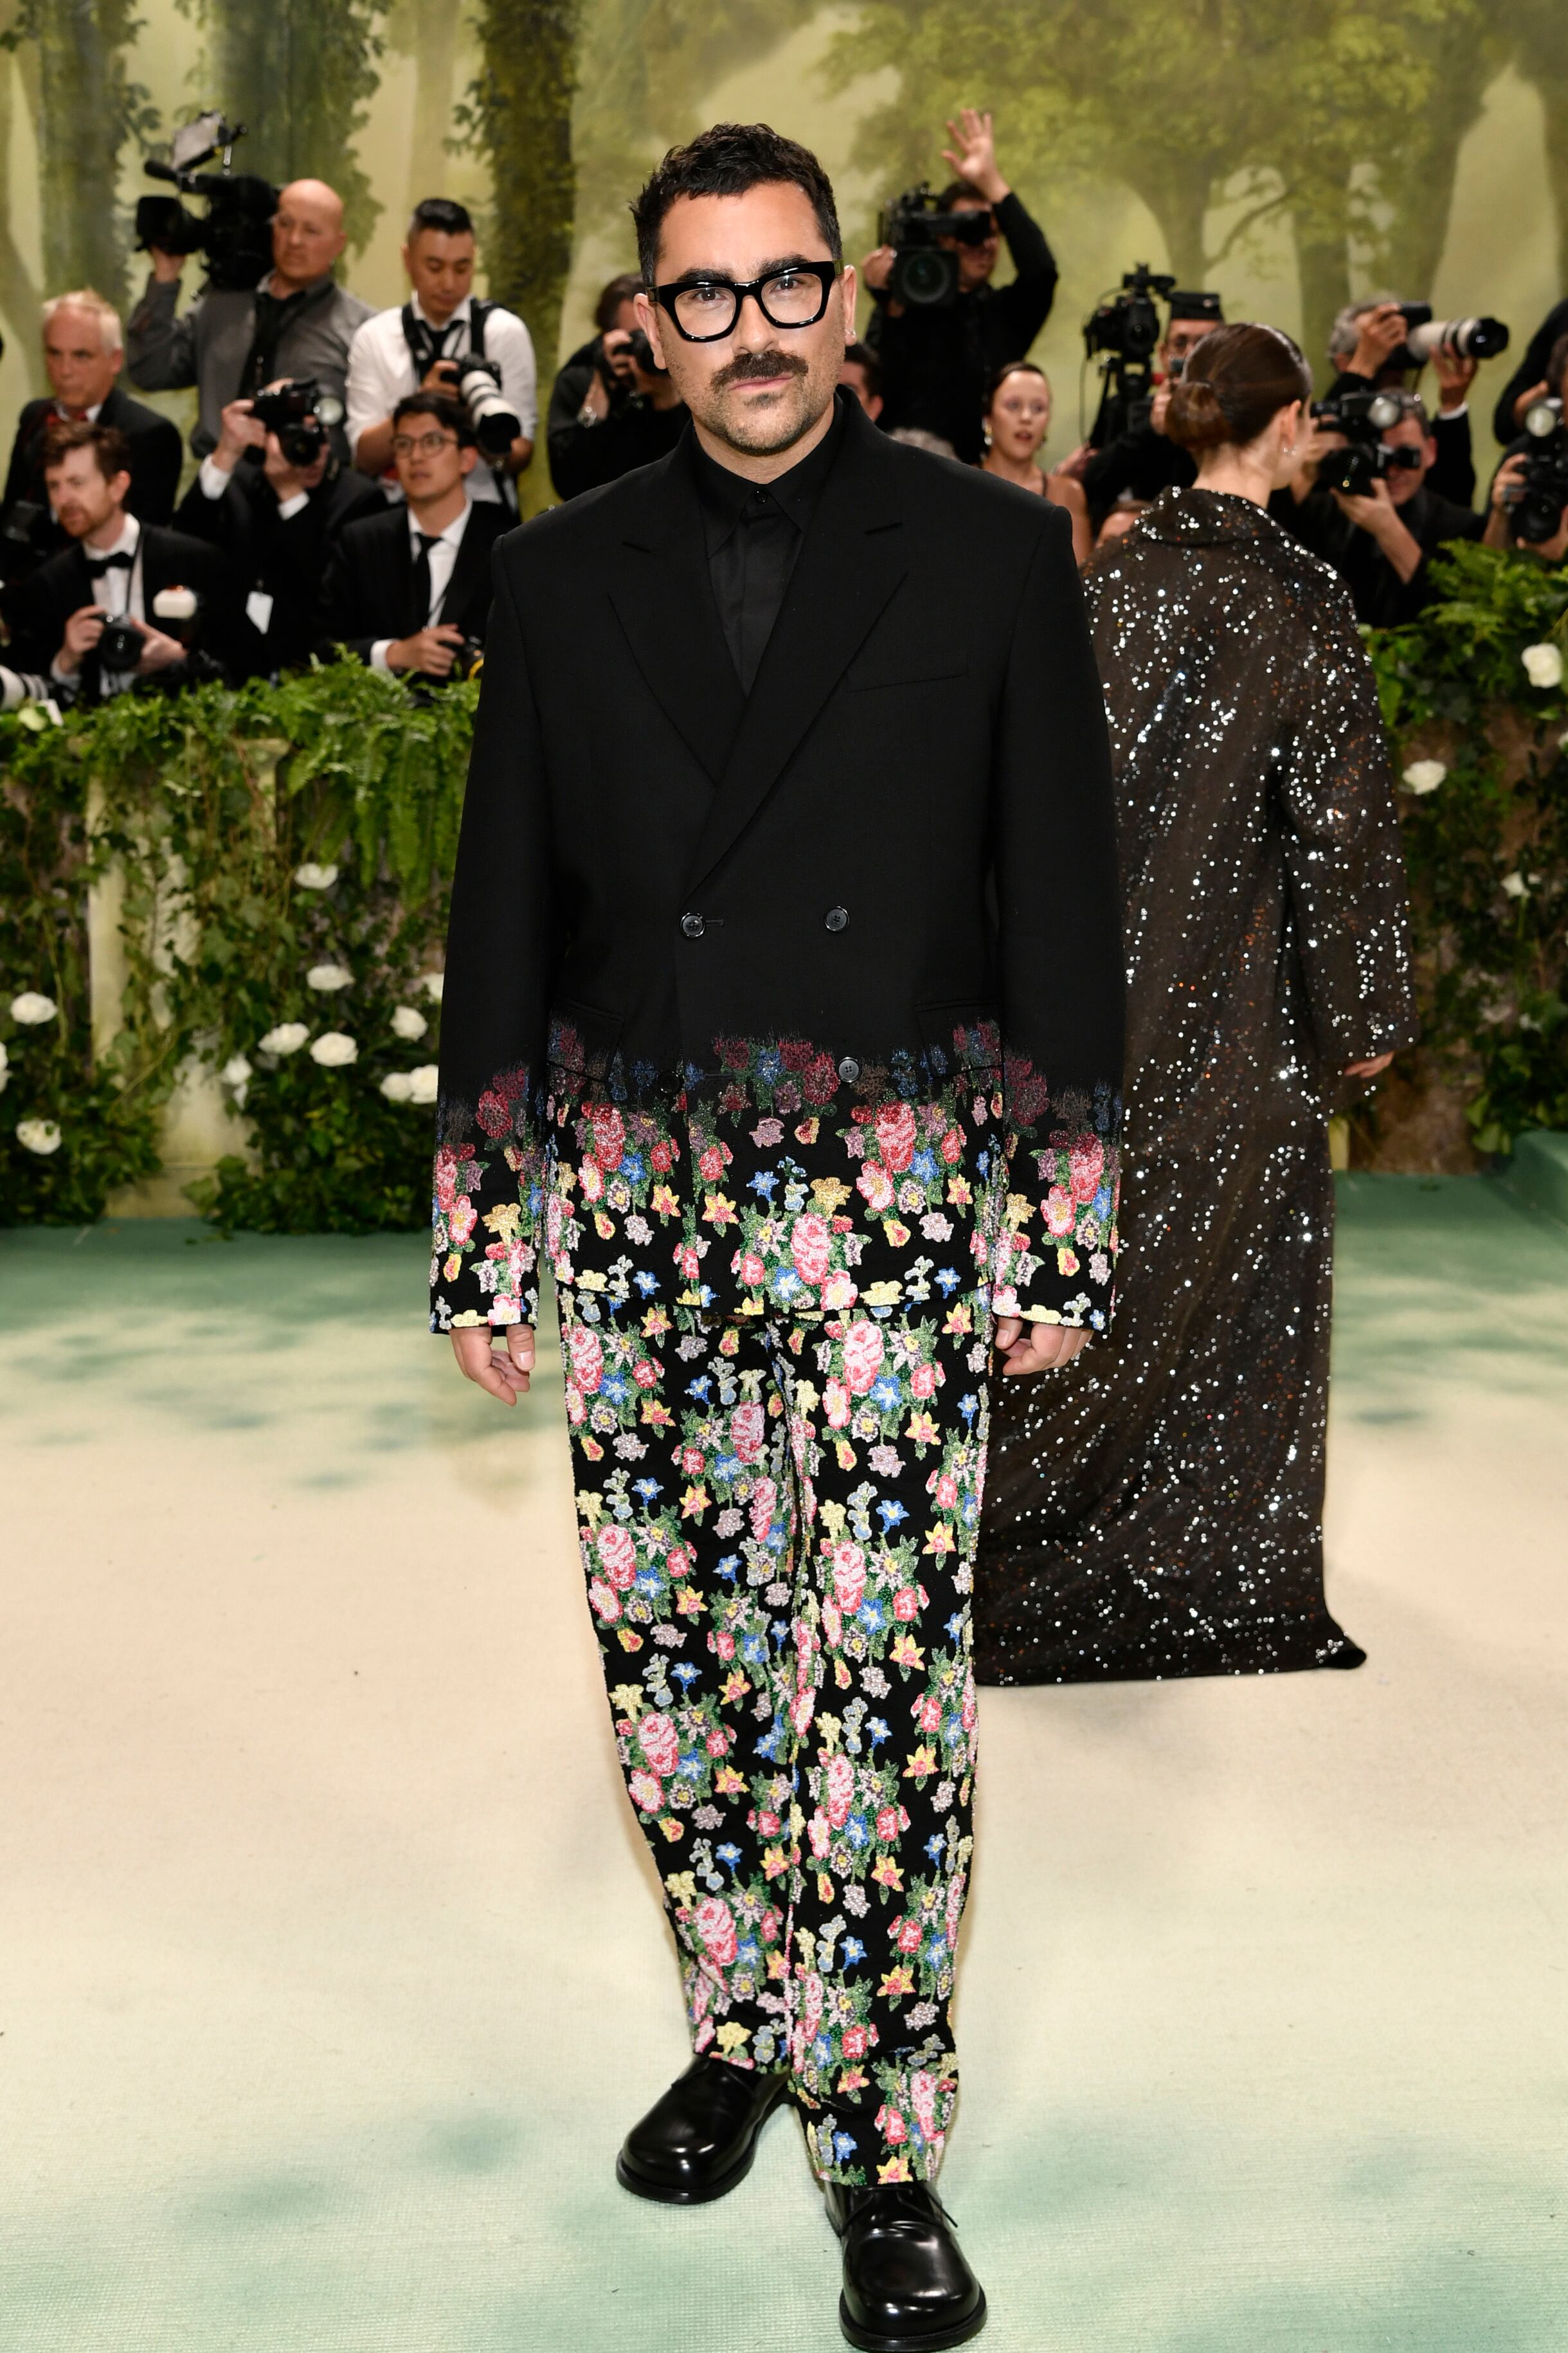 Dan Levy attends The Metropolitan Museum of Art's Costume Institute benefit gala celebrating the opening of the 